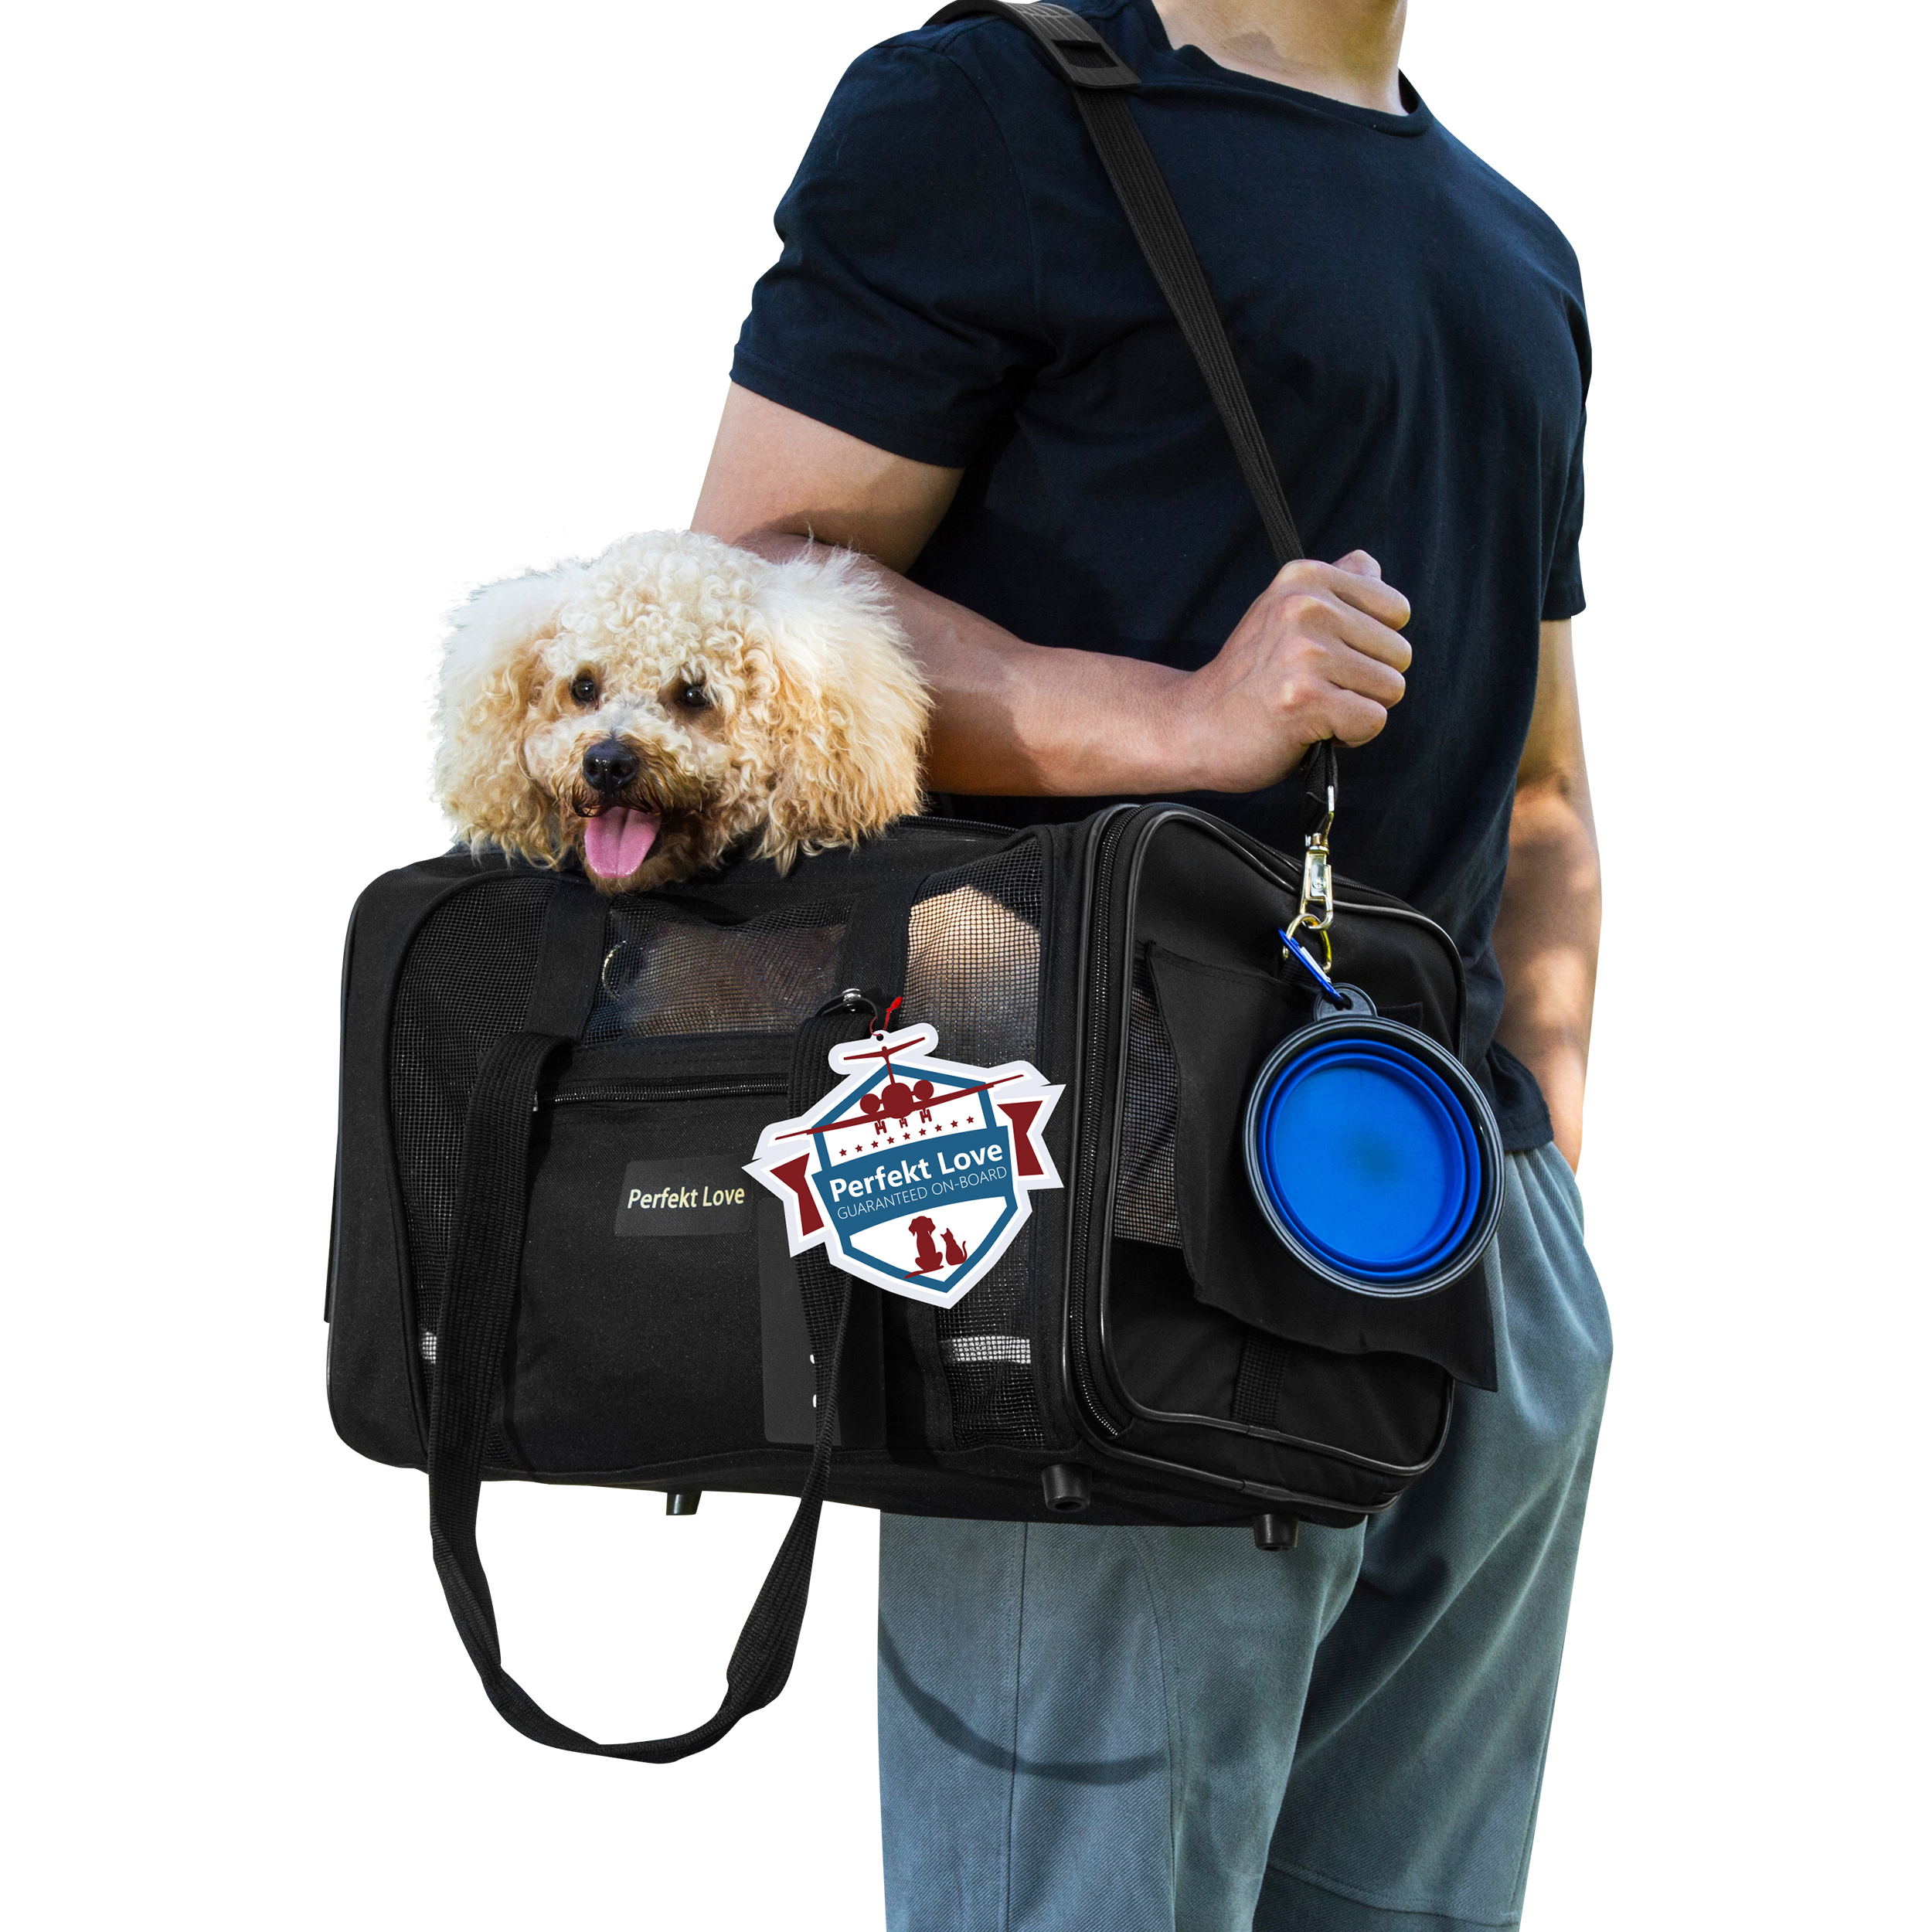 Portable Cat Carrier Folding Dog Soft Sided Travel Carrier Bag with Pet Pad Pet Carrier Airline Approved for Small Cats